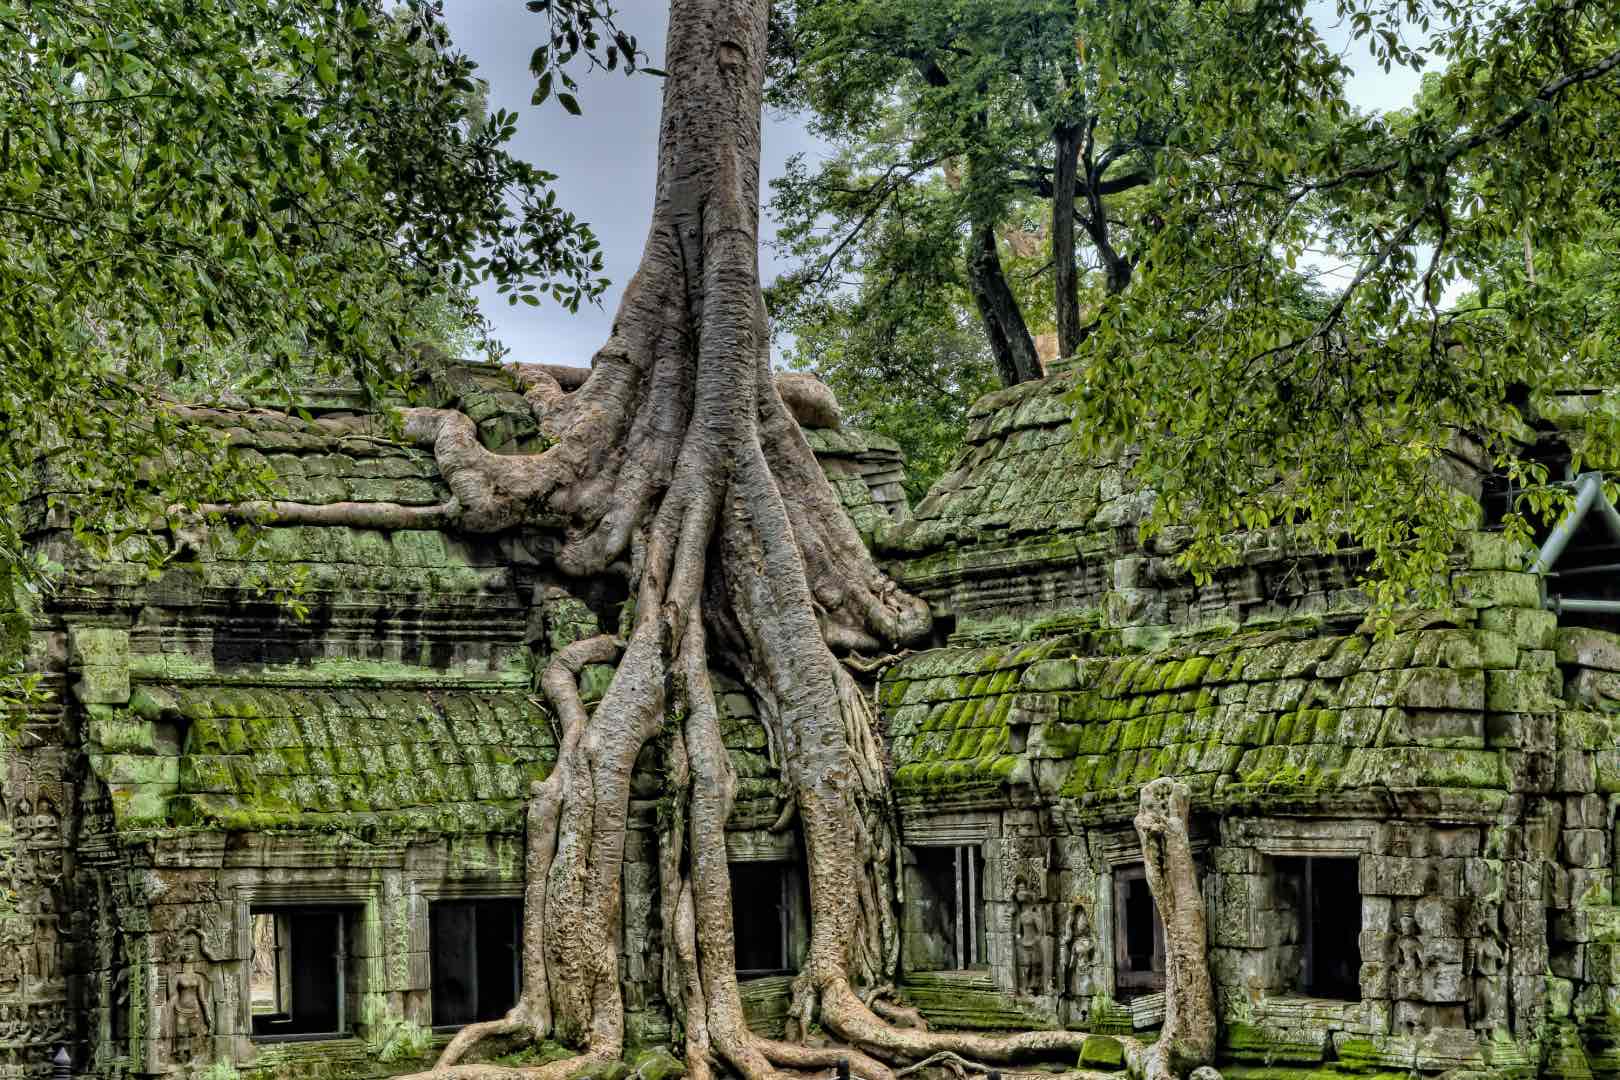 Angkor Wat temple taken over by nature